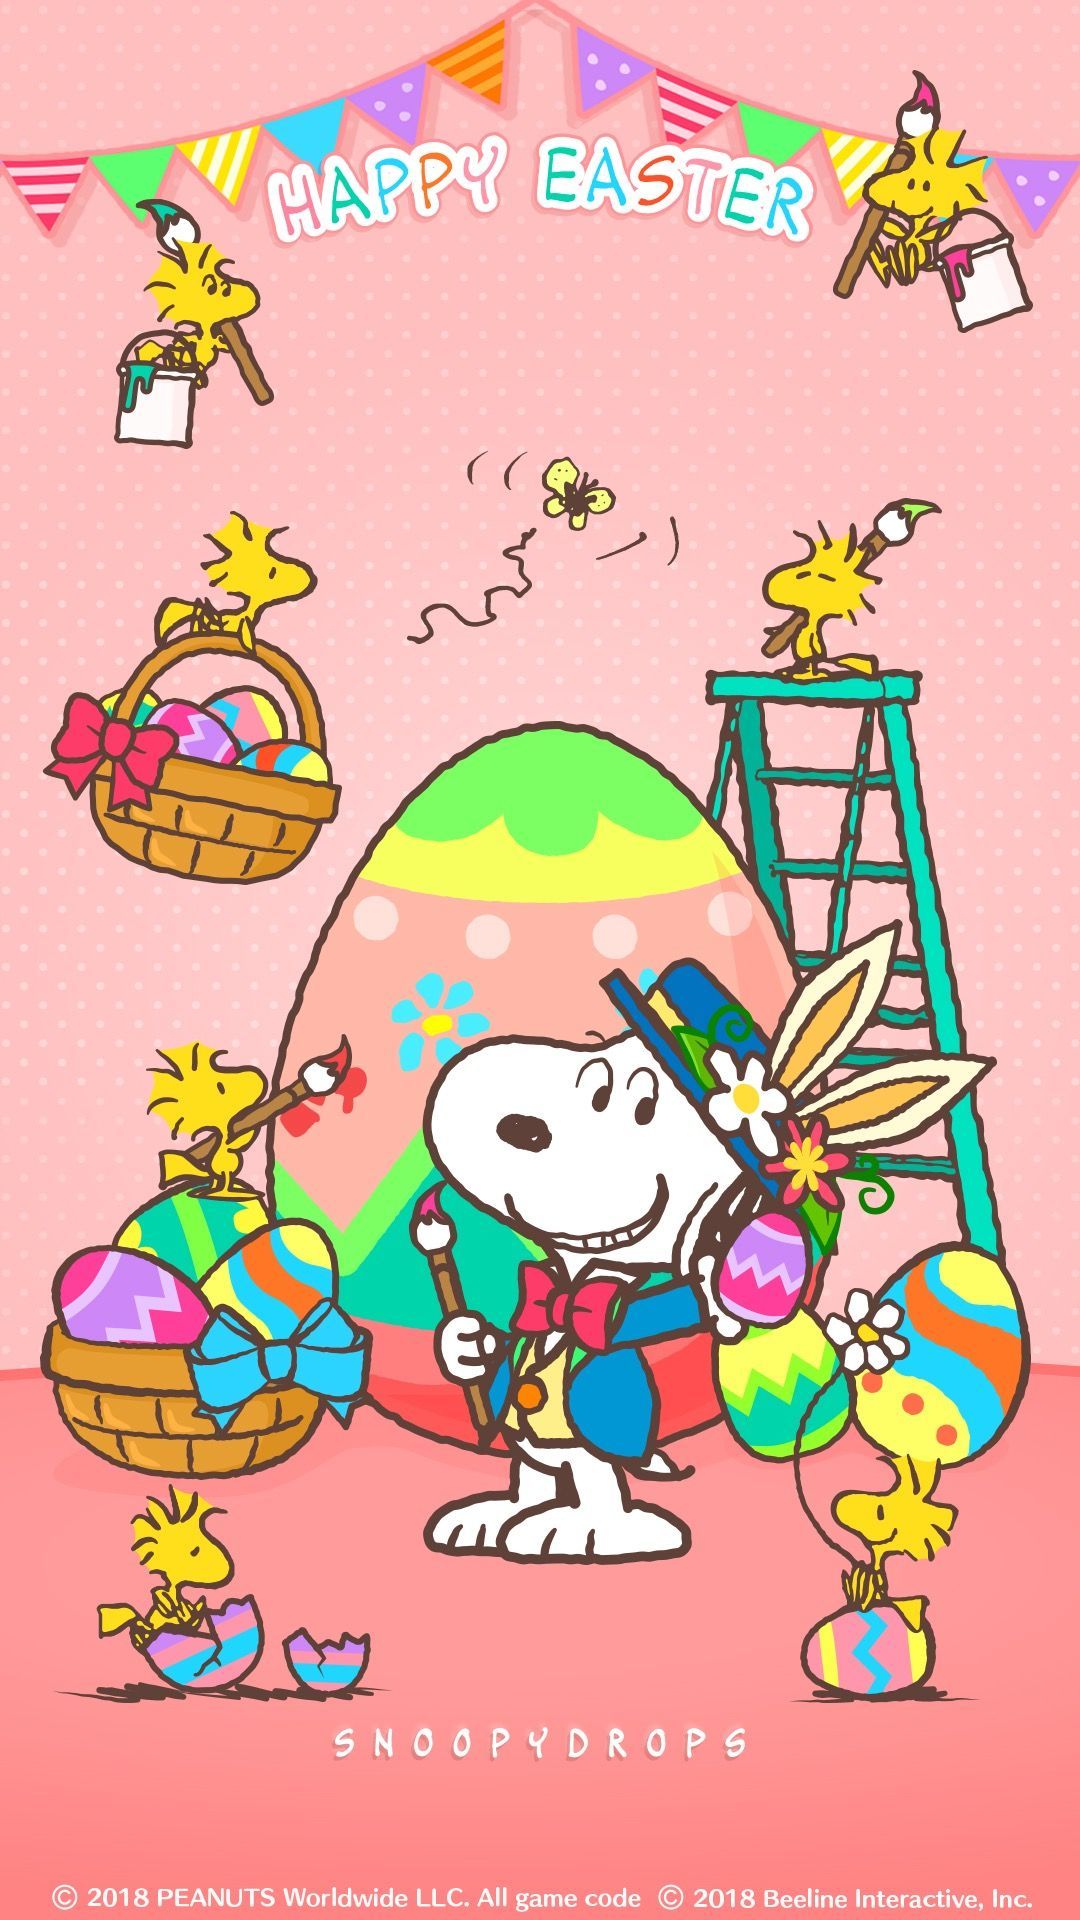 SNOOPY #スヌーピー（ハッピー・バニー）. Snoopy easter, Snoopy wallpaper, Snoopy picture